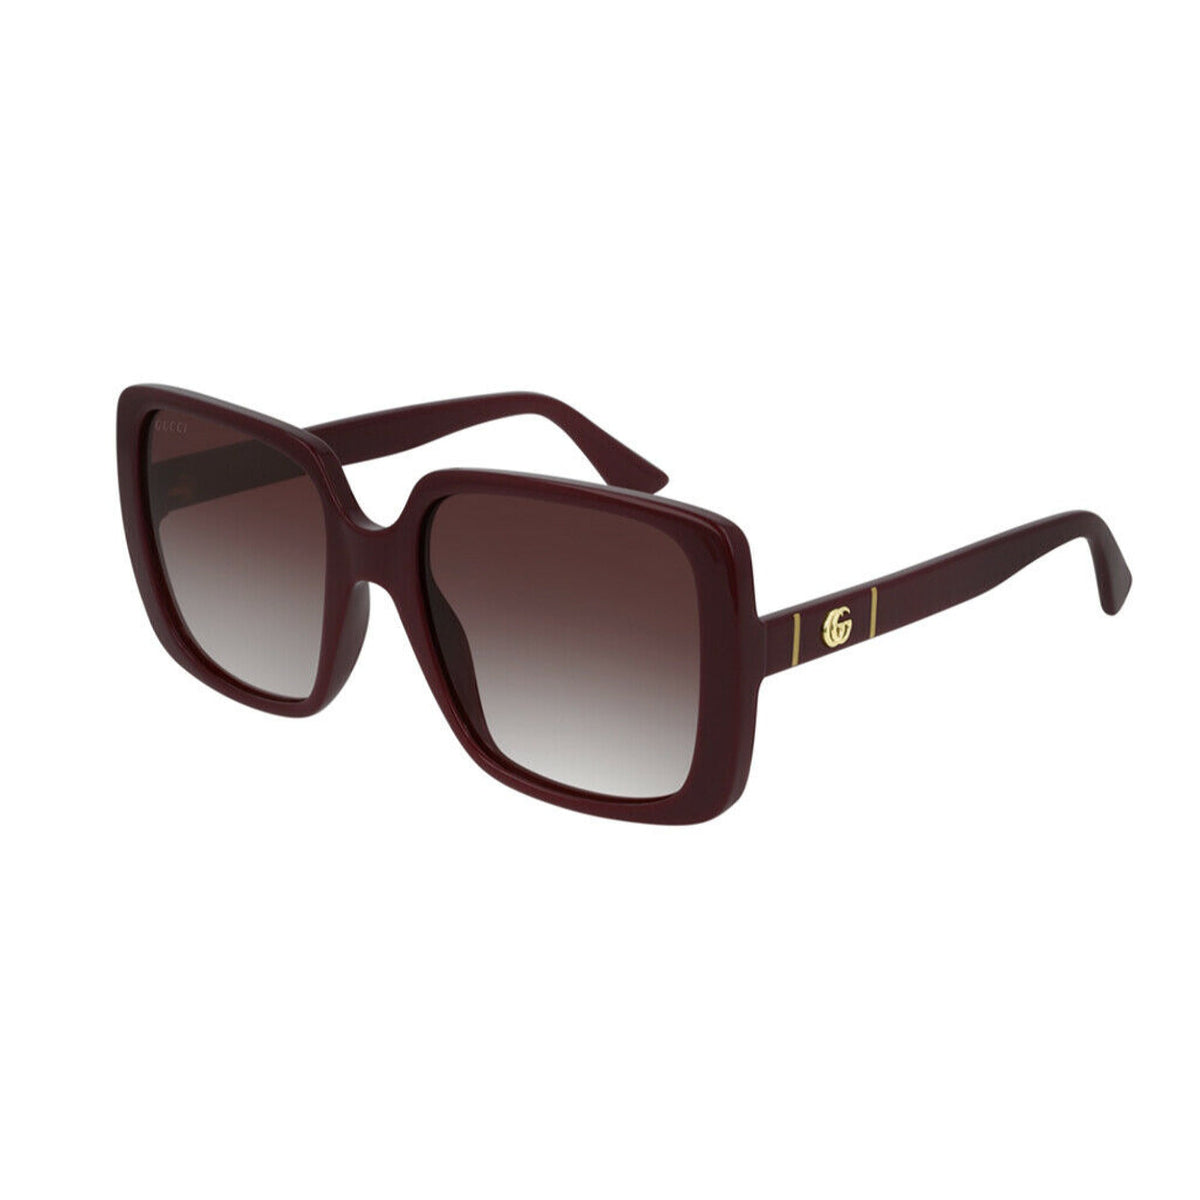 Gucci Women&#39;s Sunglasses Spring Summer 2020 Burgundy Red CR 39 CR 39 Gradient GG0632S 003